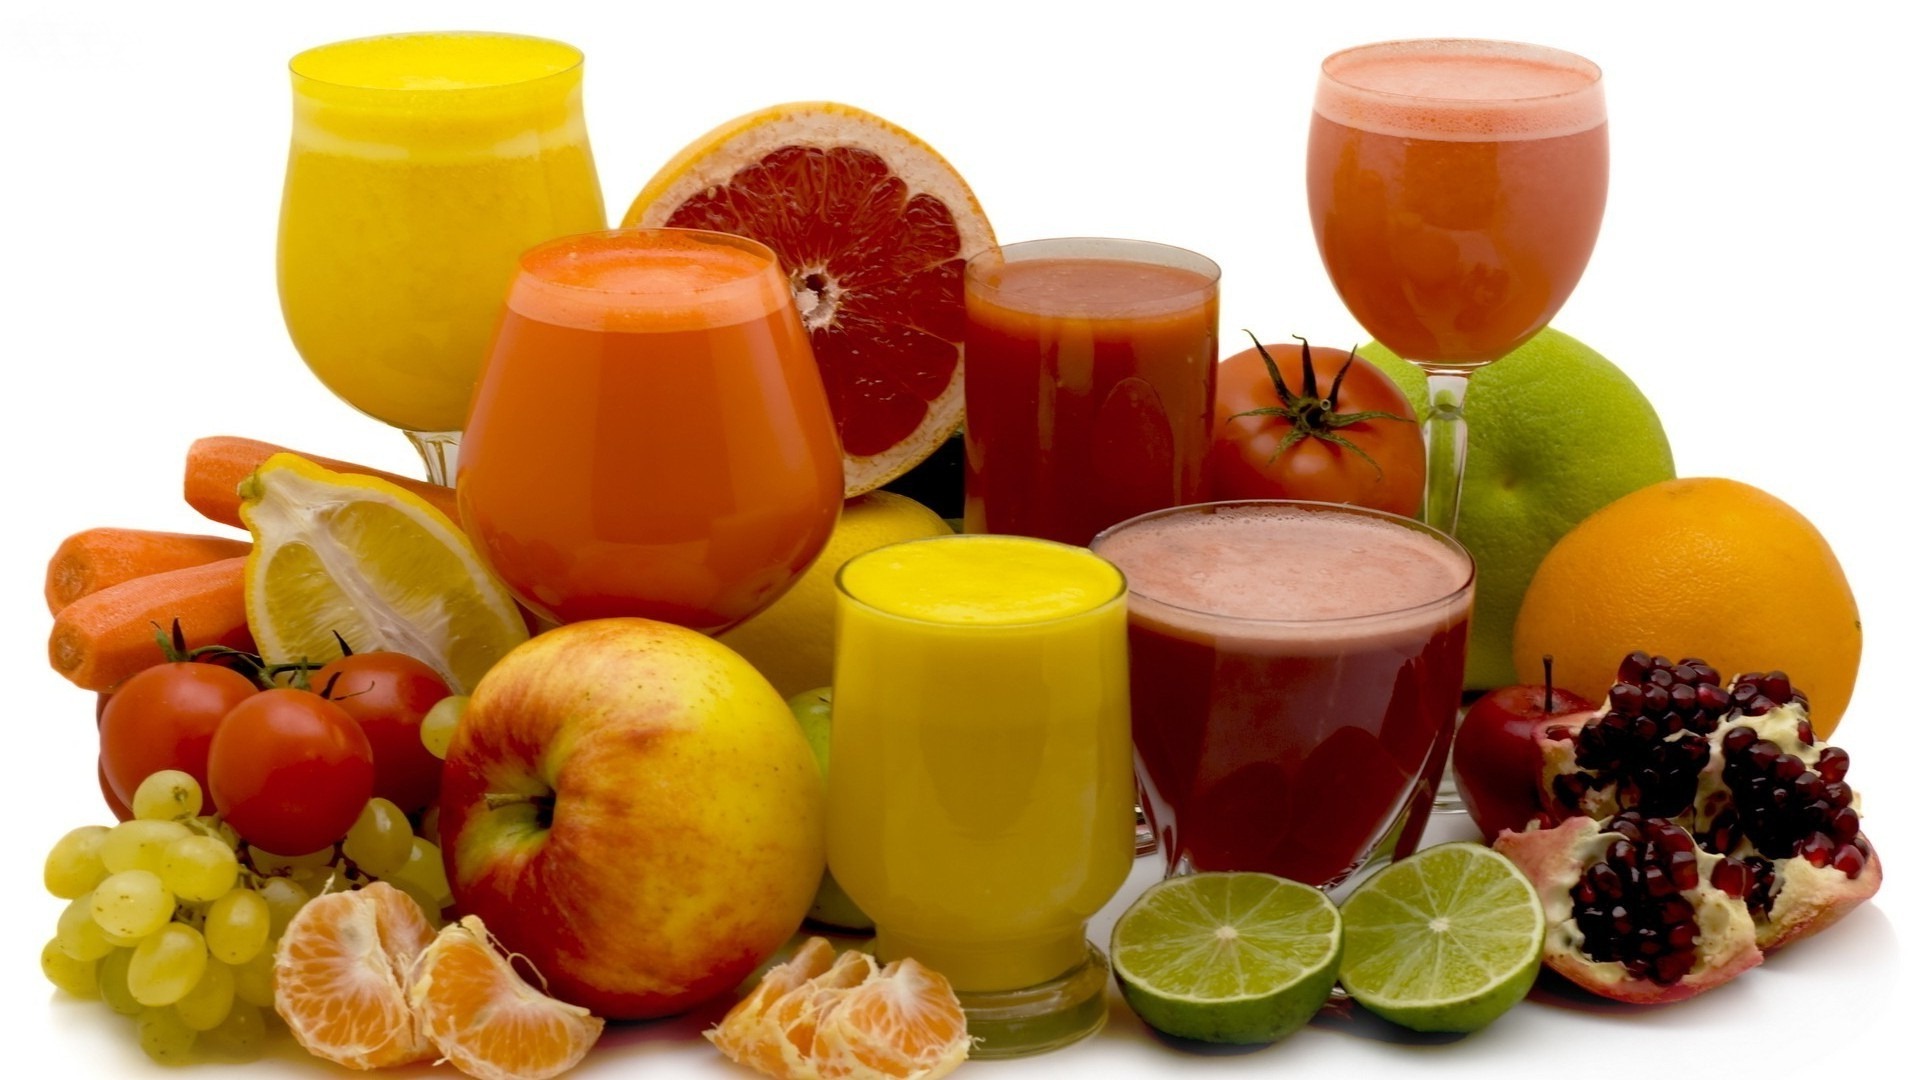 Fruit Juice Wallpapers High Quality | Download Free